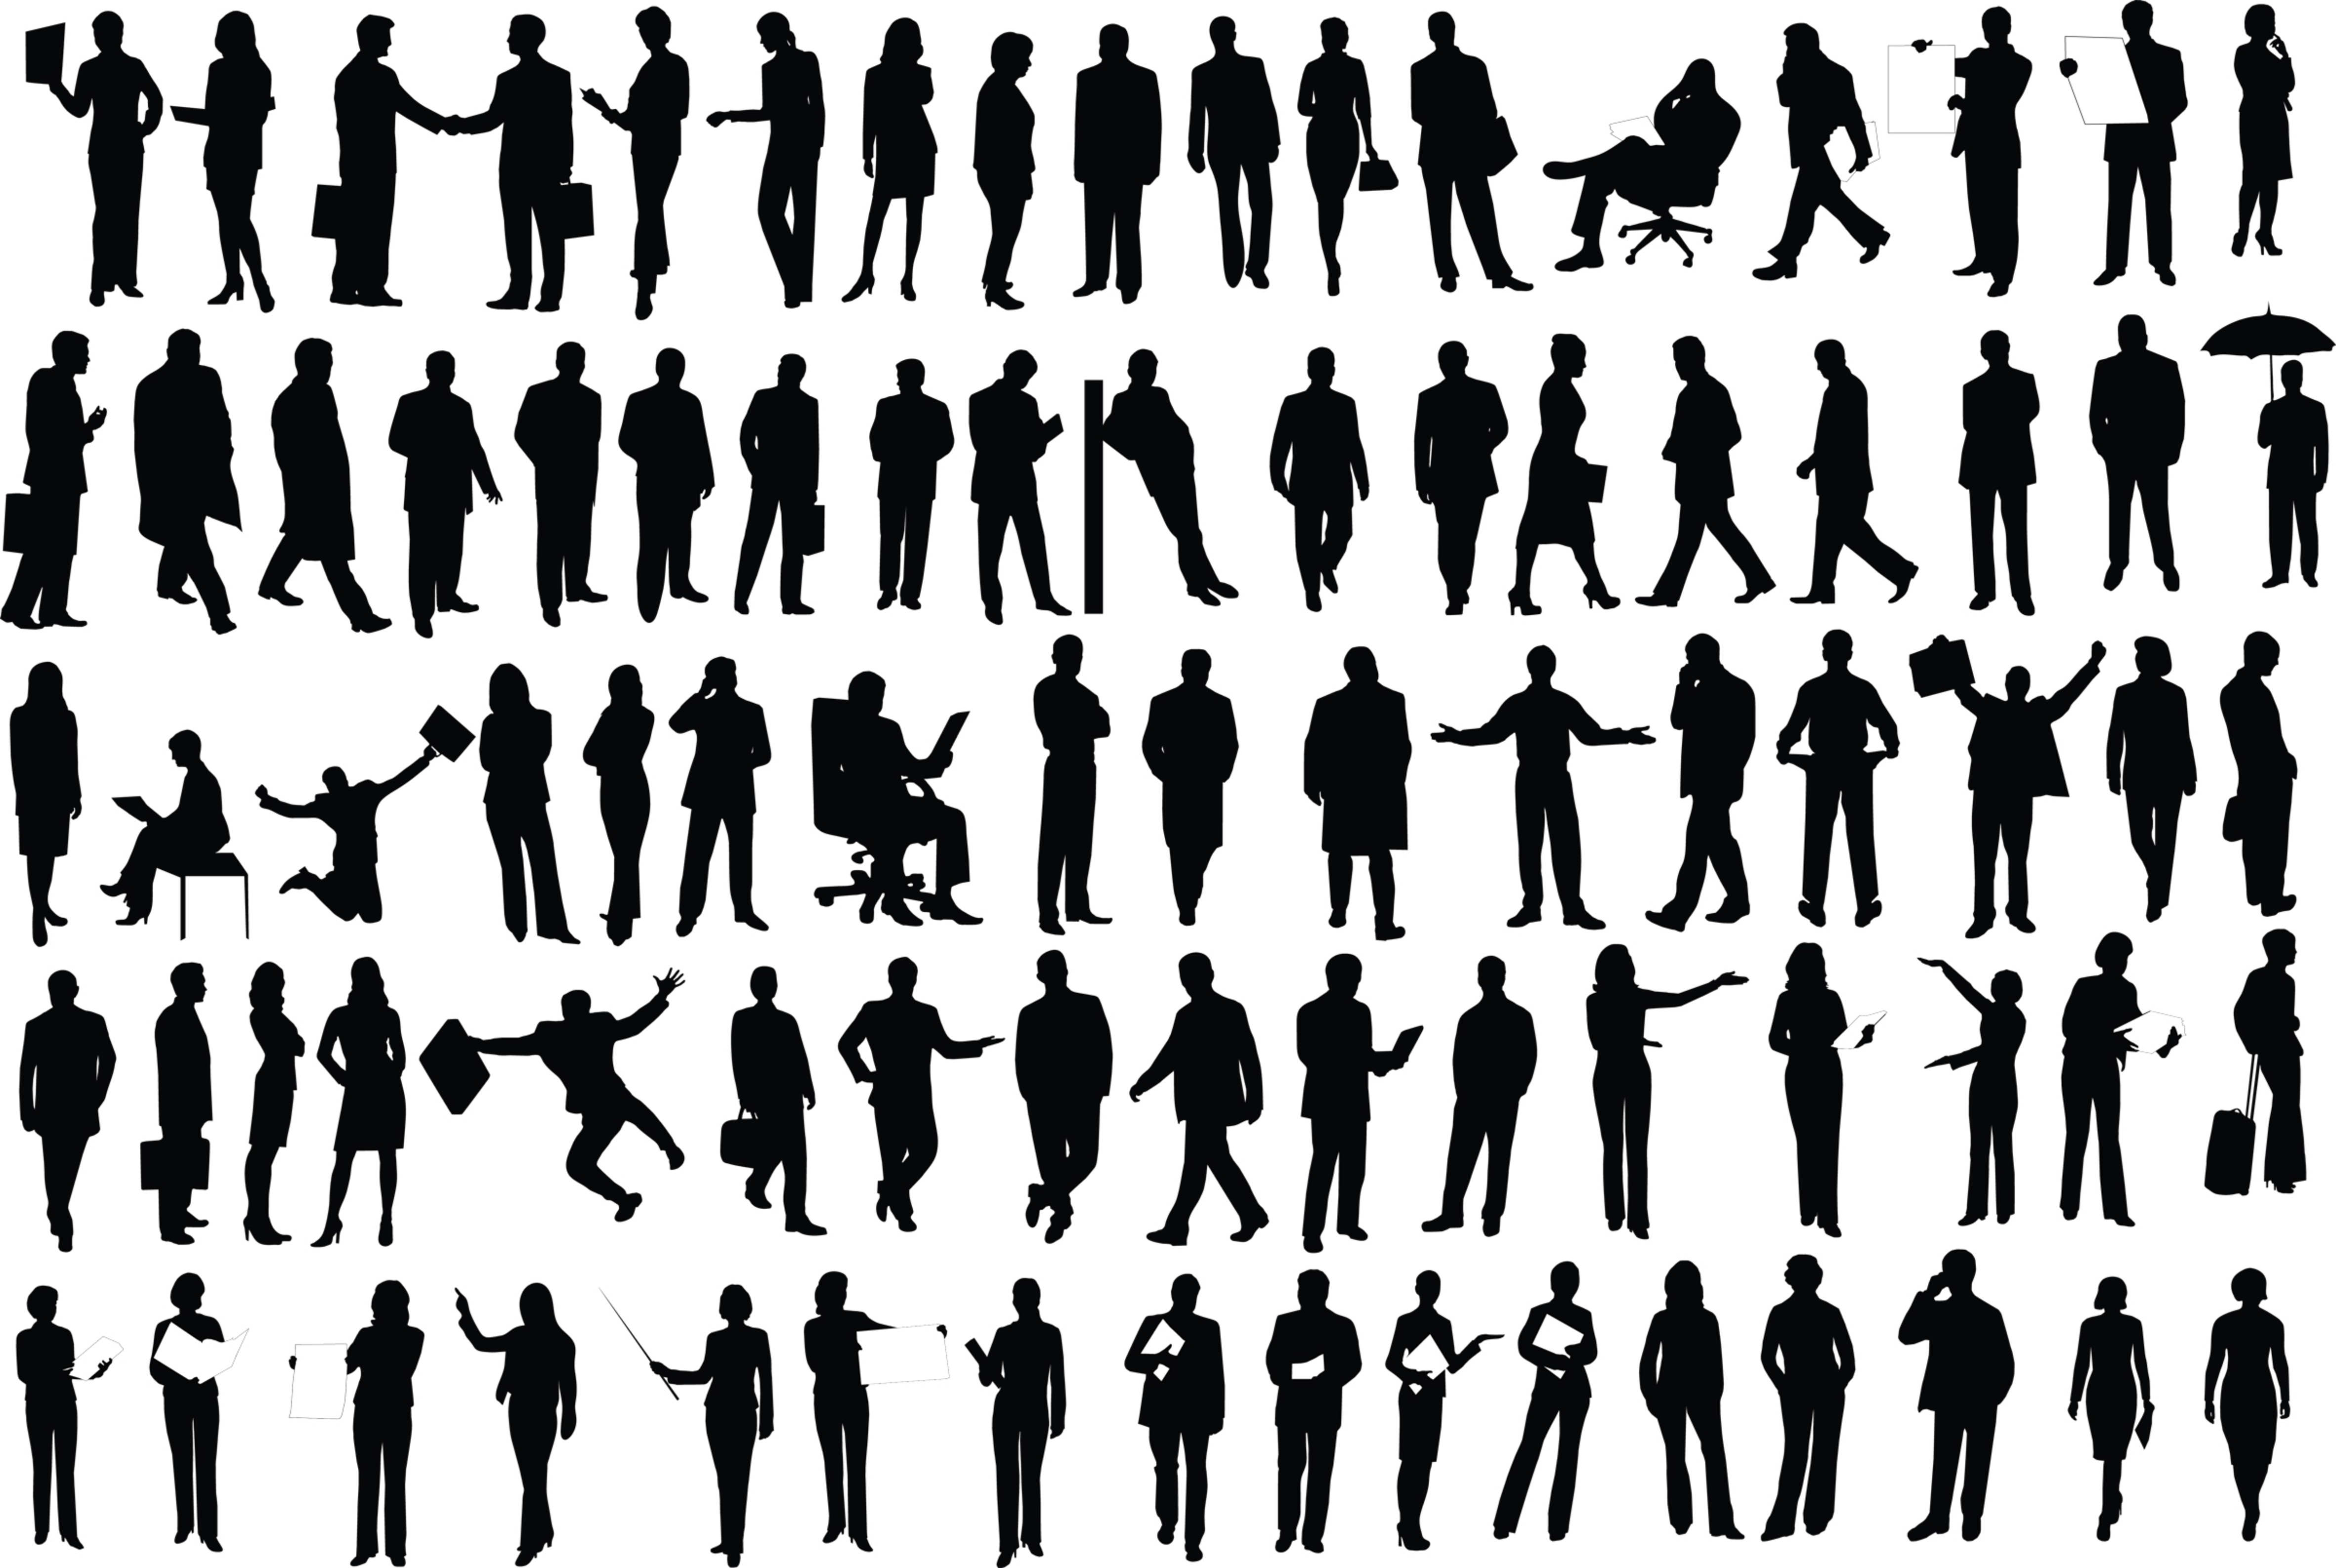 Human Body Silhouette   Clipart Best